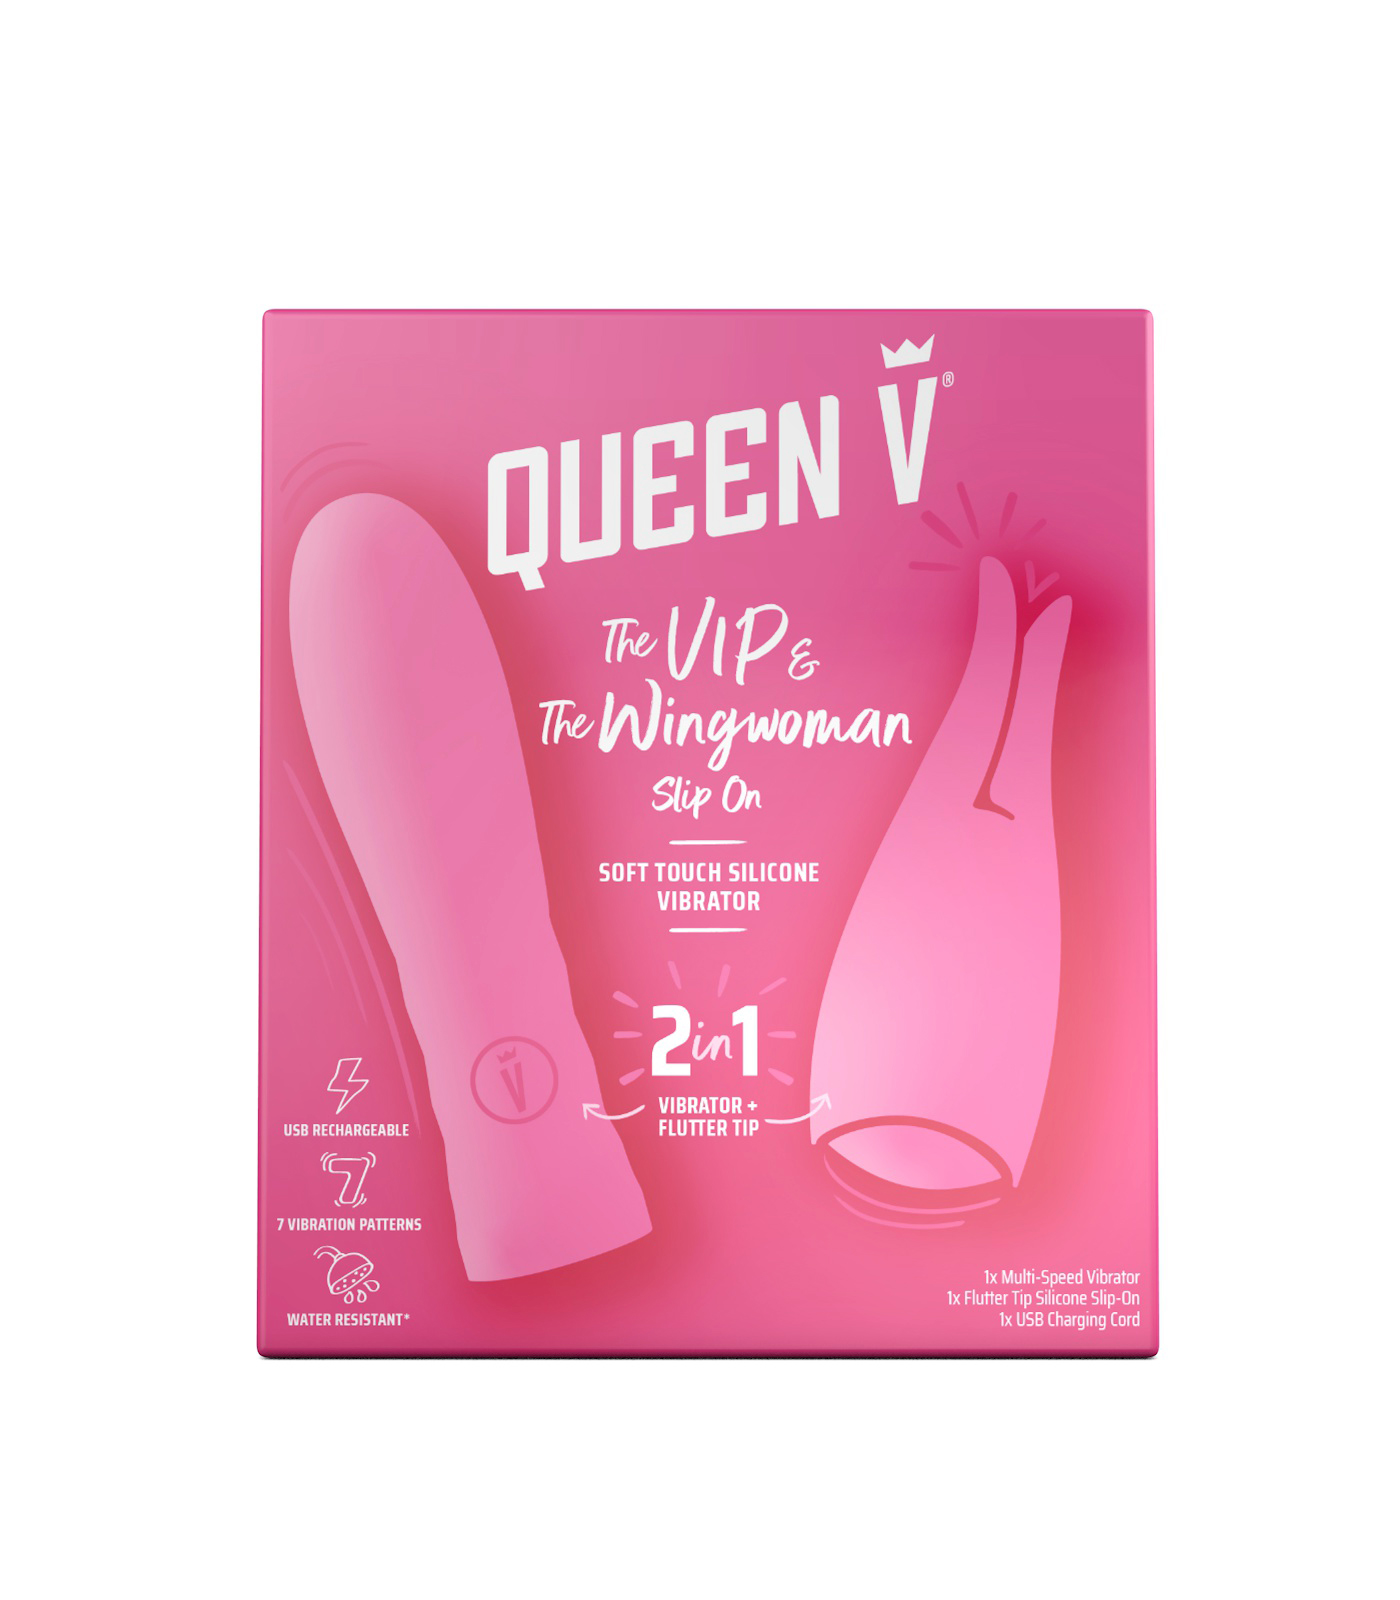 QUEEN V® The VIP & The Wingwoman Slip On - Soft Touch Silicone Vibrator 2in1